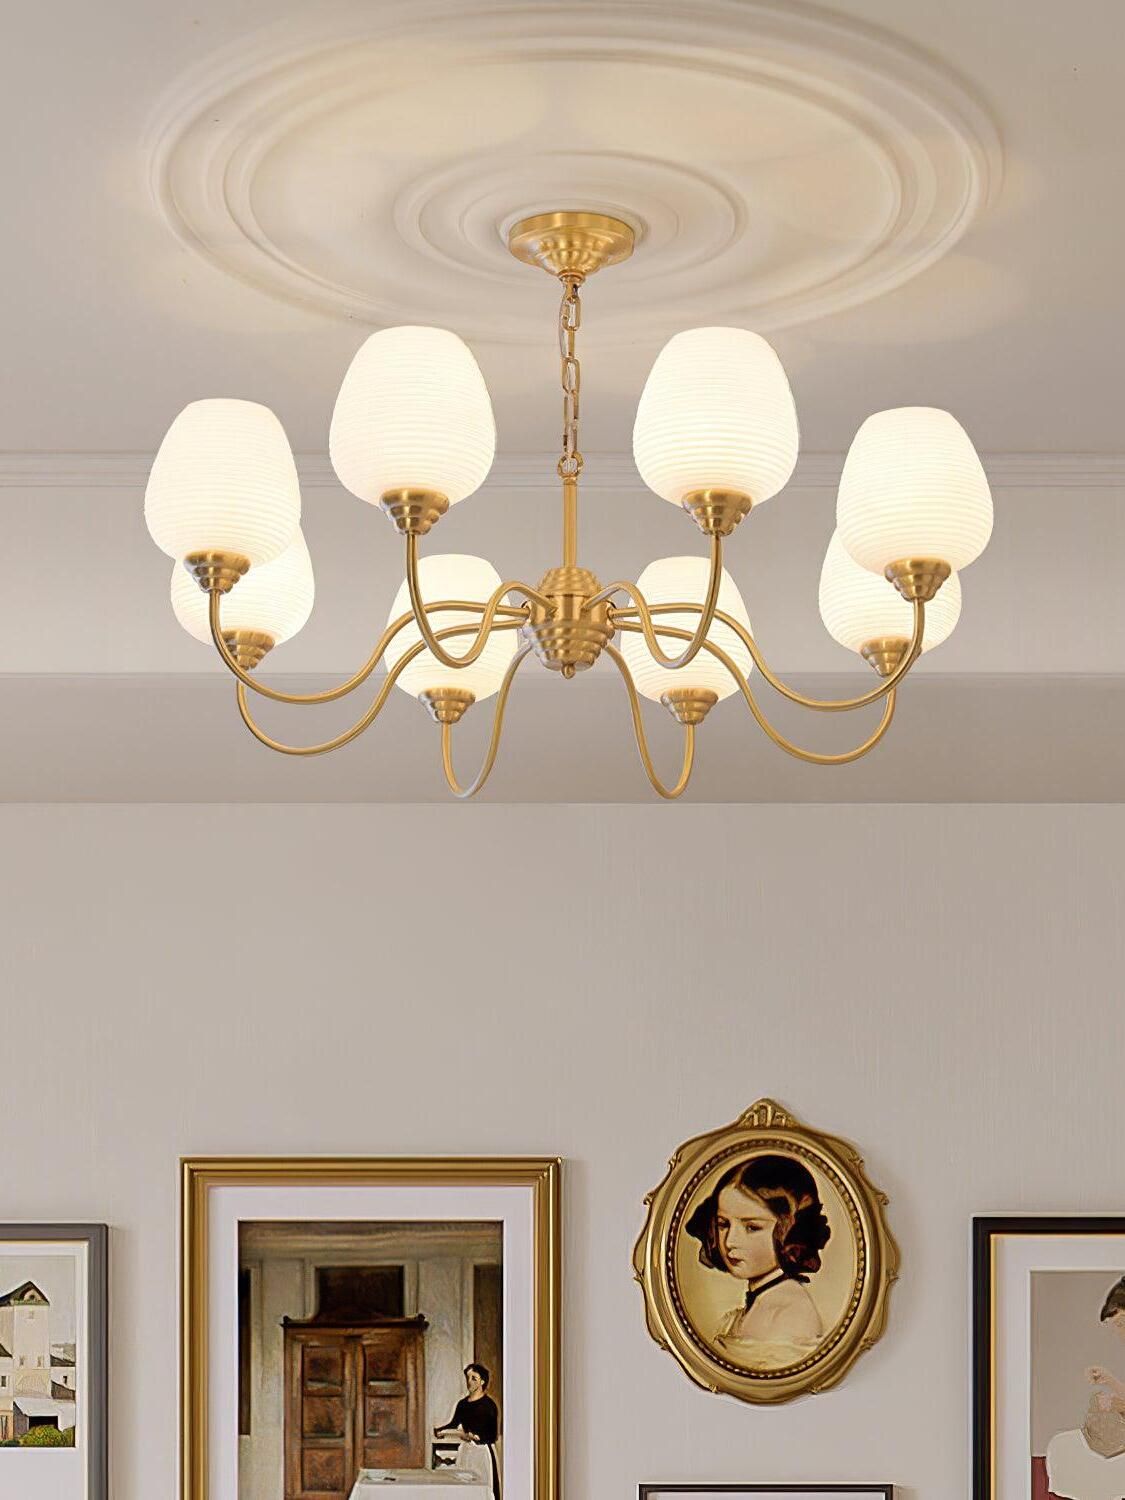 Antique Luminaires “Embracing Elegance: A Guide to Choosing and Decorating with Antique Luminaires”